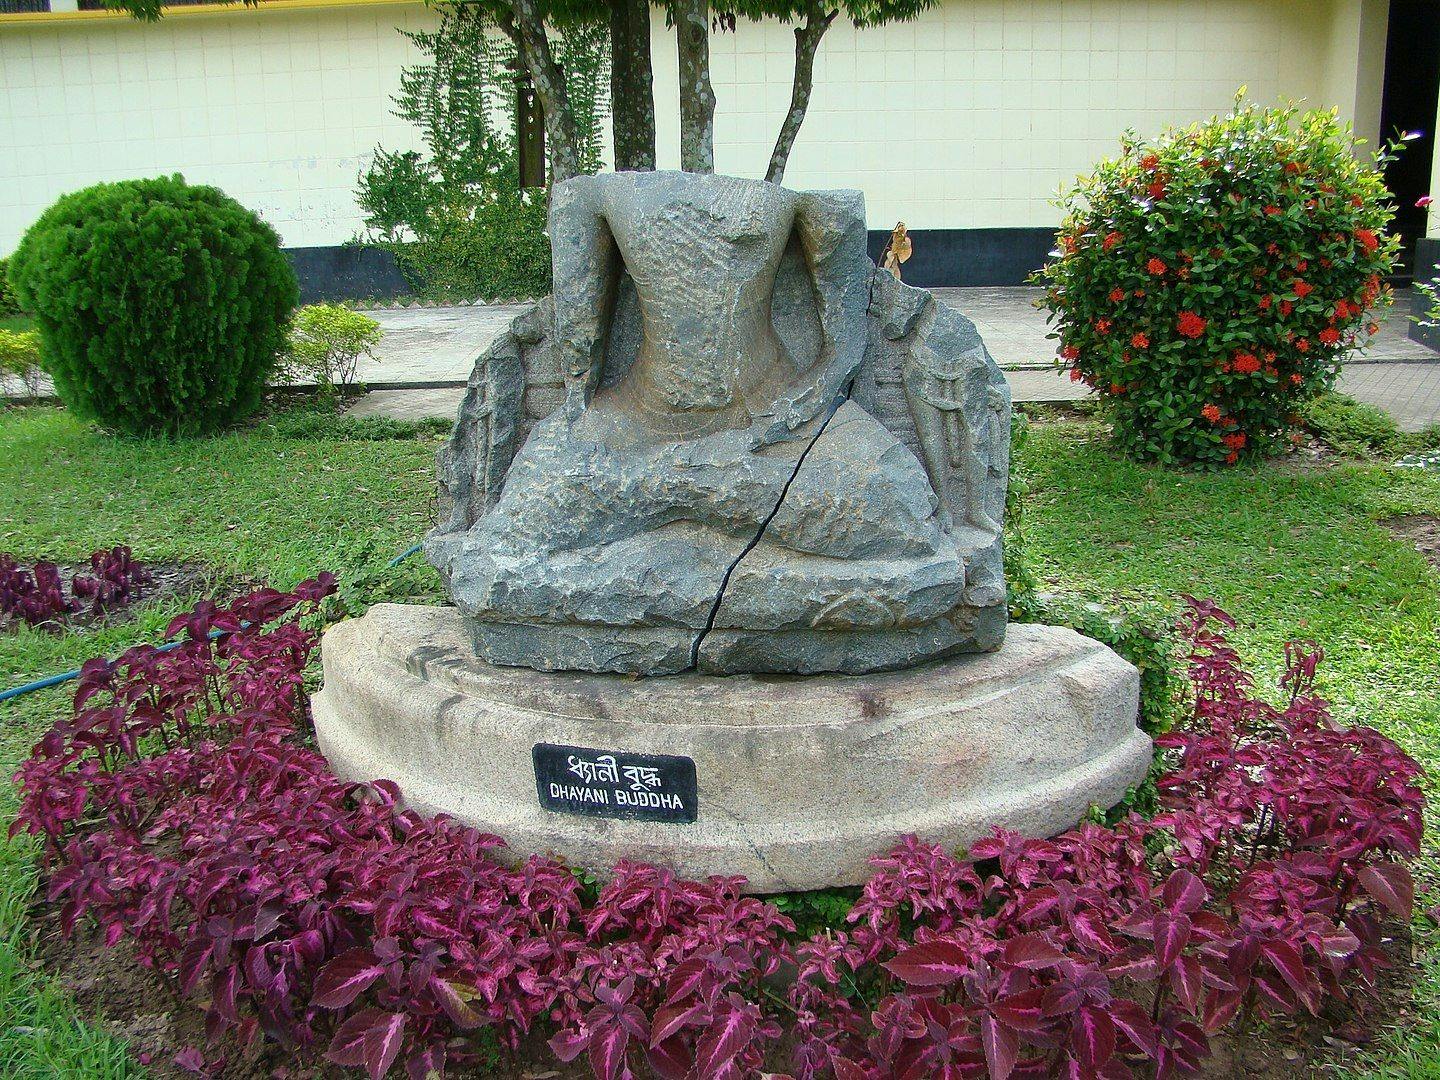 A broken sculpture recovered from the site, now at the Mahasthangarh Museum